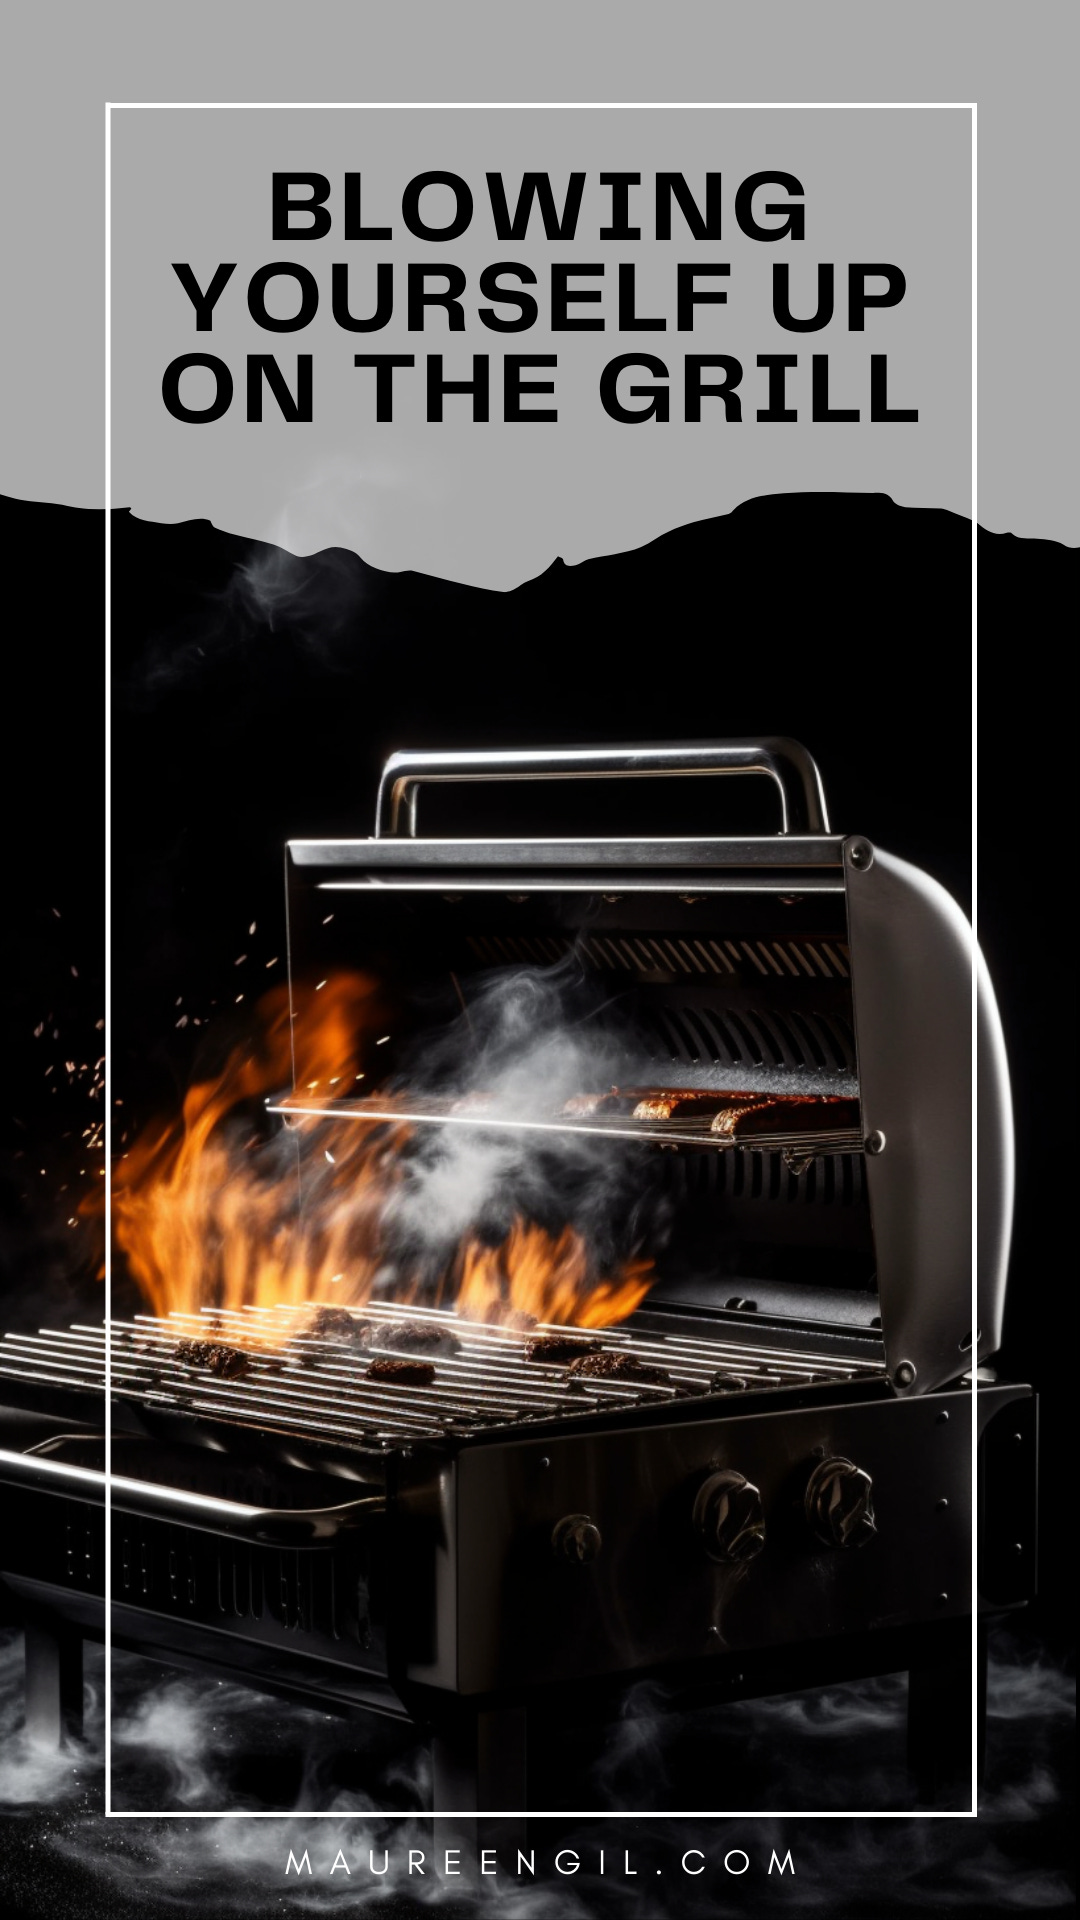 Gas grill explosions are more common than you might think, which can cause serious injuries and even death. Don't let a gas grill explosion ruin your summer cookout. Protect yourself by letting someone else light the gas grill for you.